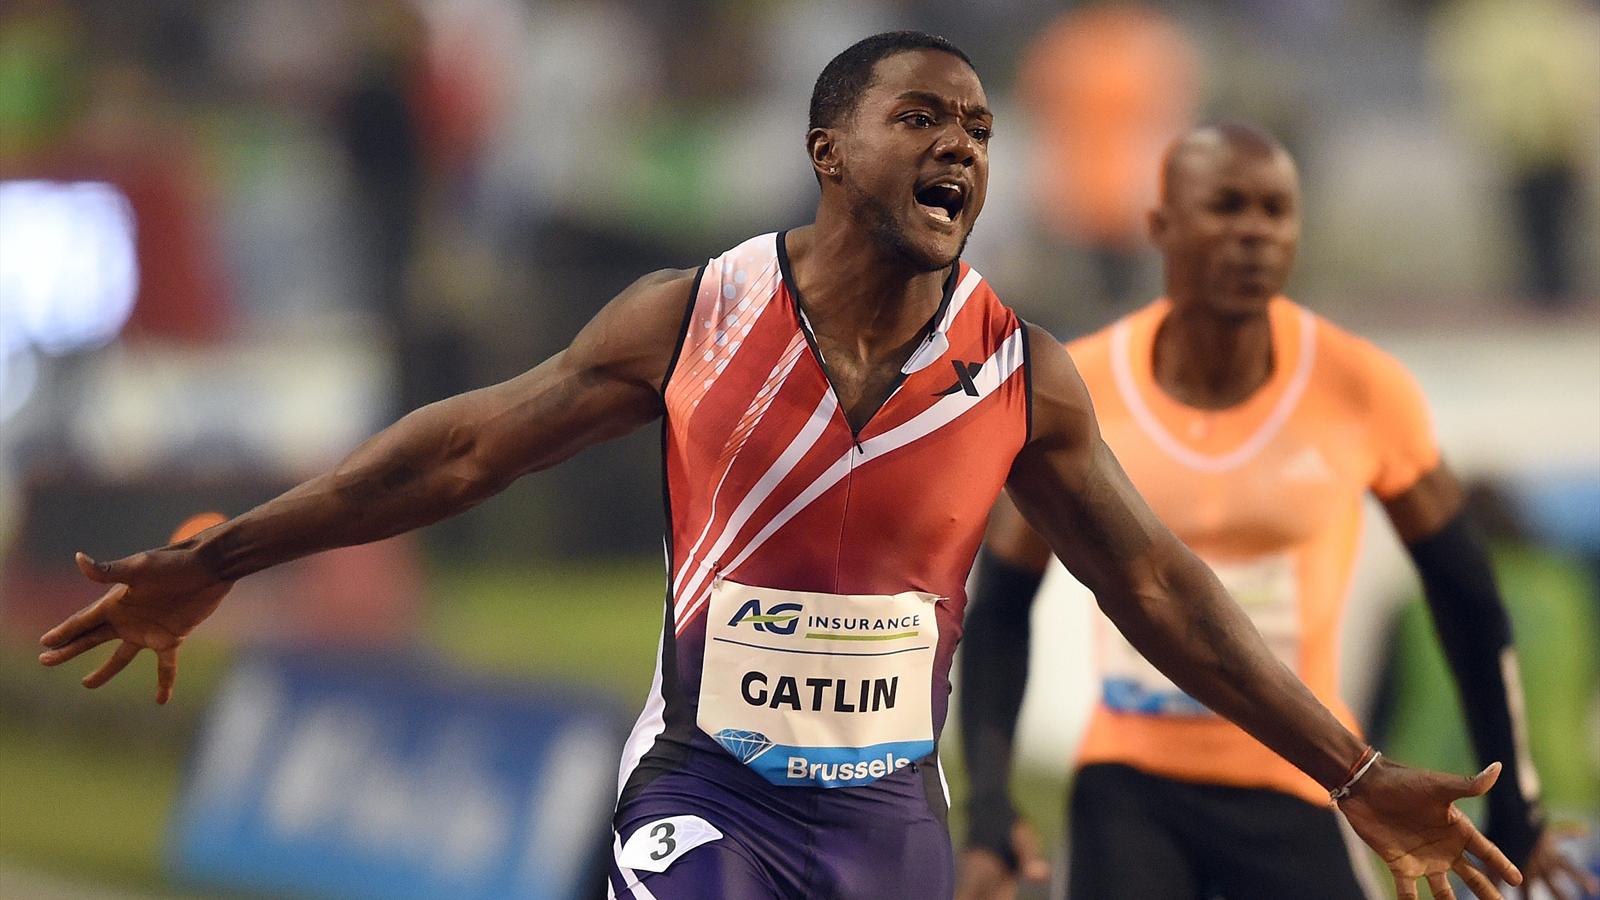 America's serial drugs cheat Justin Gatlin has failed to make the shortlist for the IAAF World Athlete of the Year Award ©Getty Images